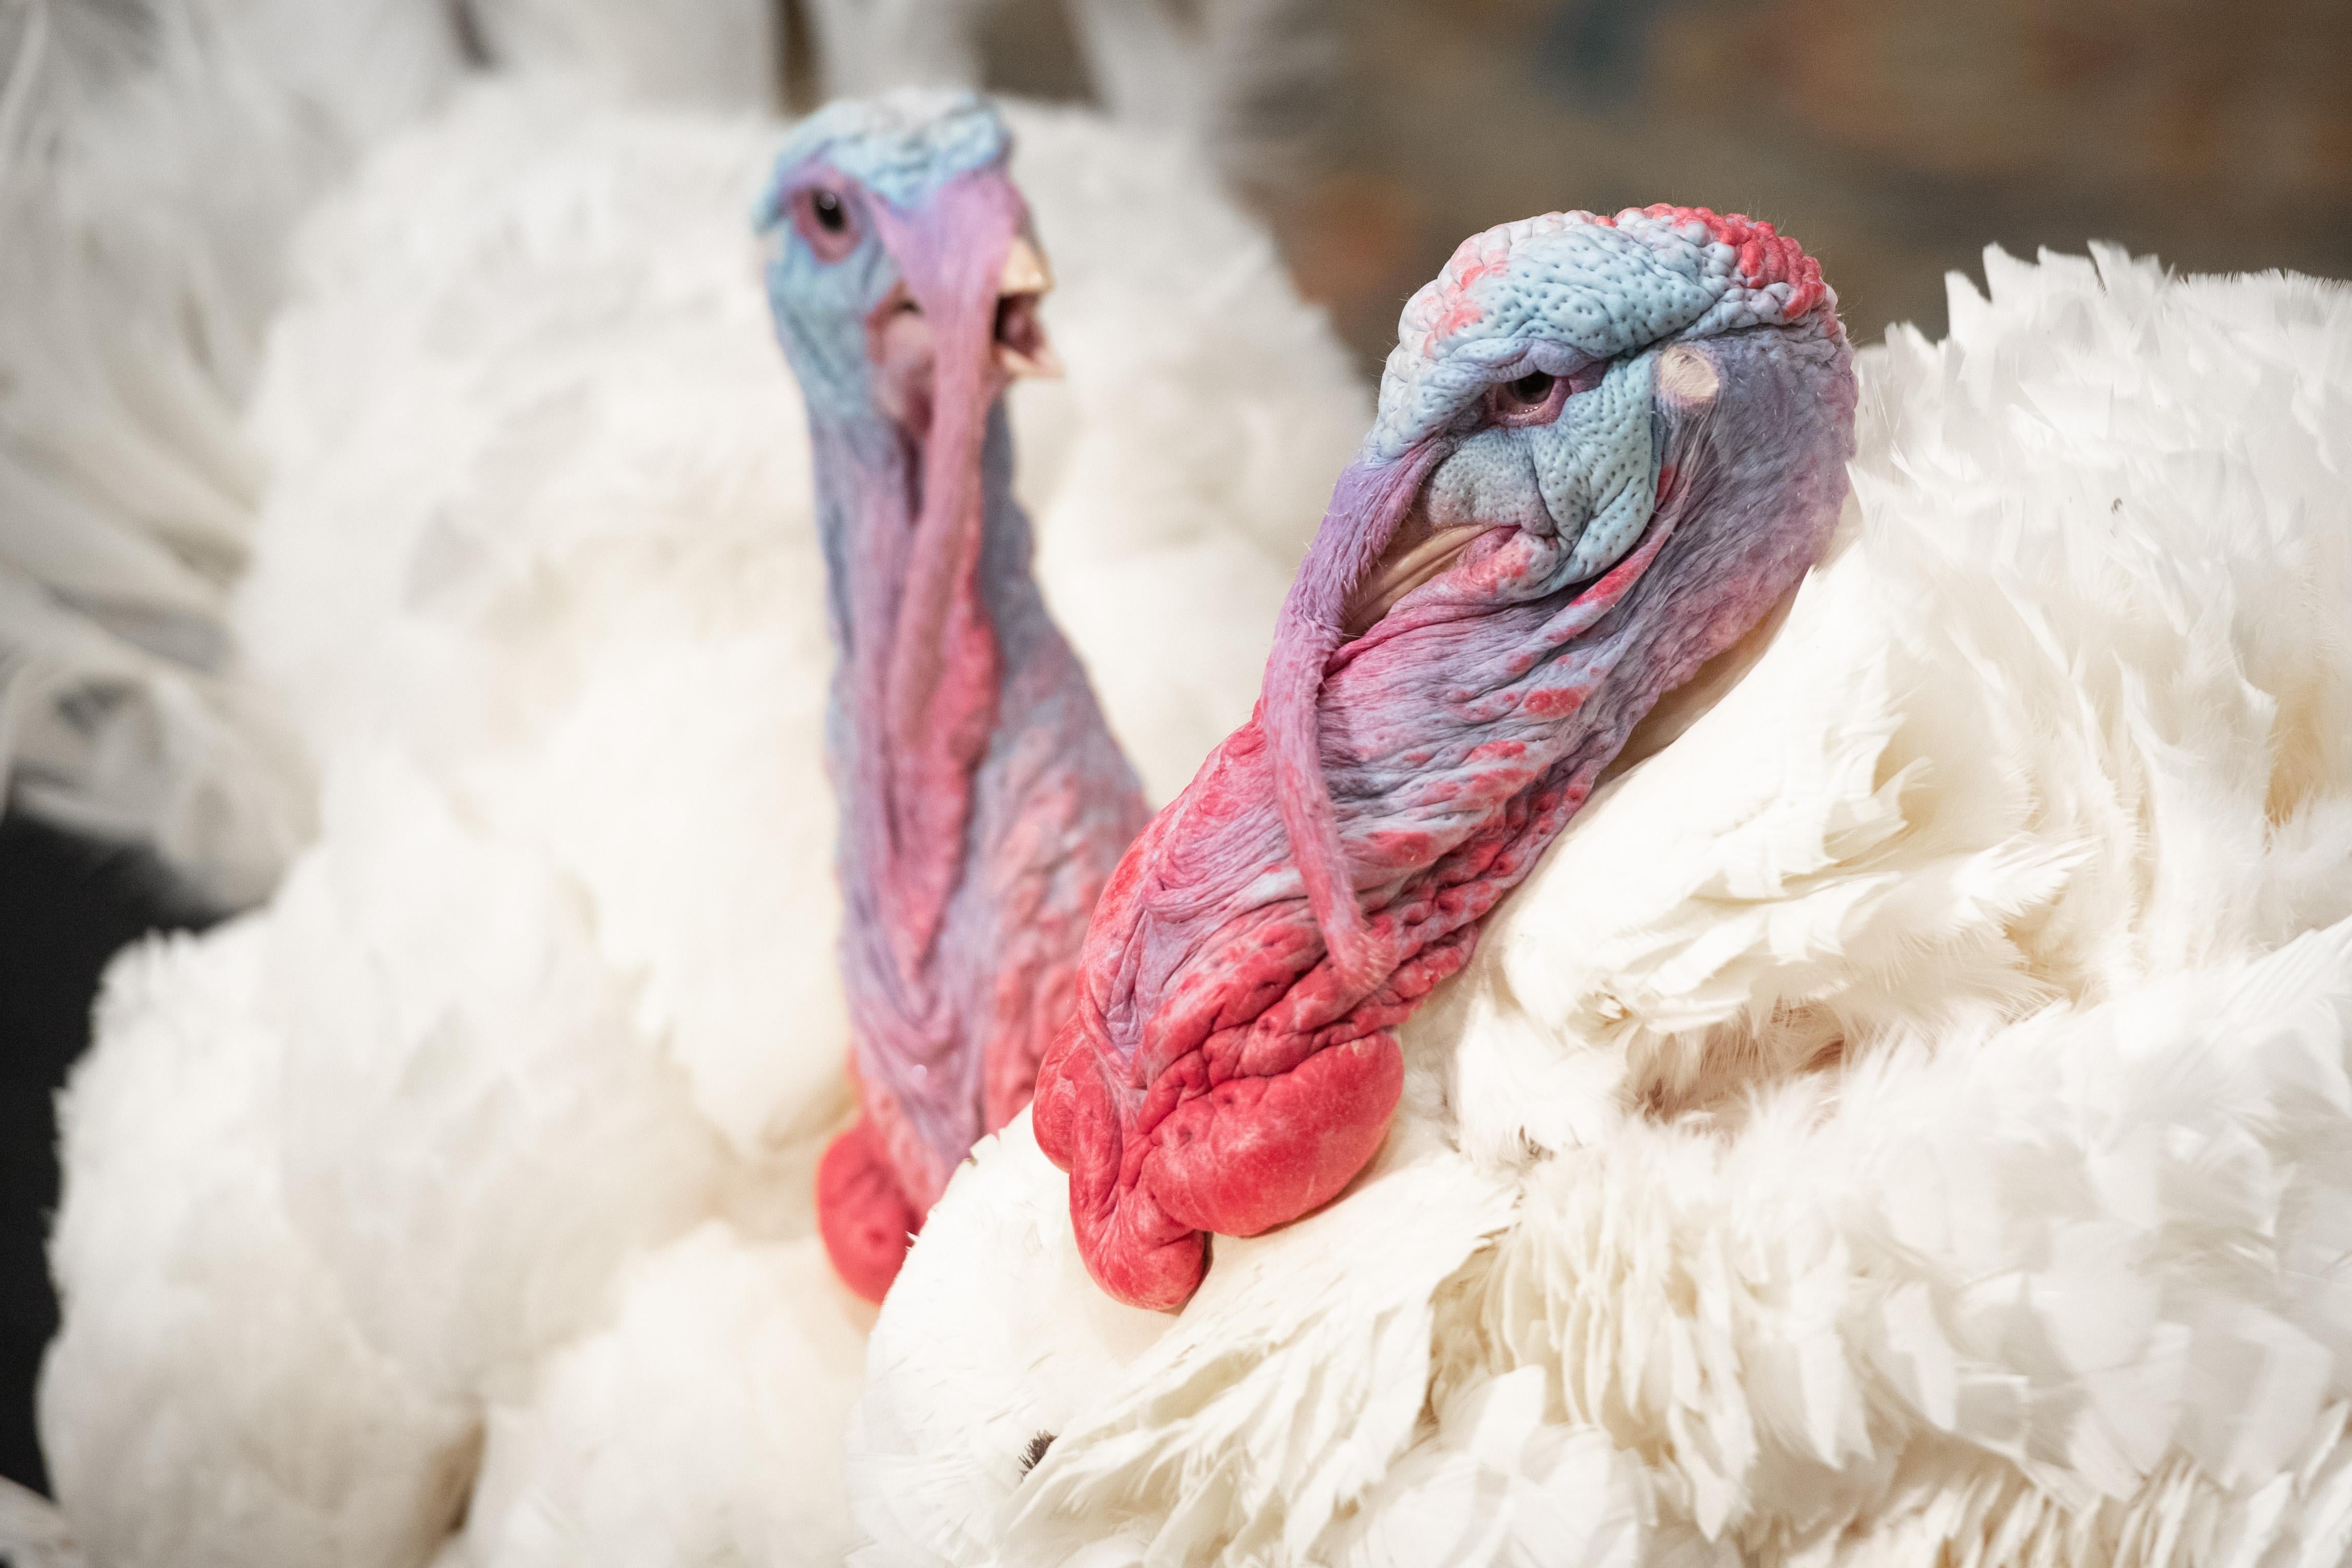 A close-up of two turkeys, with white feathers and blue and red wattles.